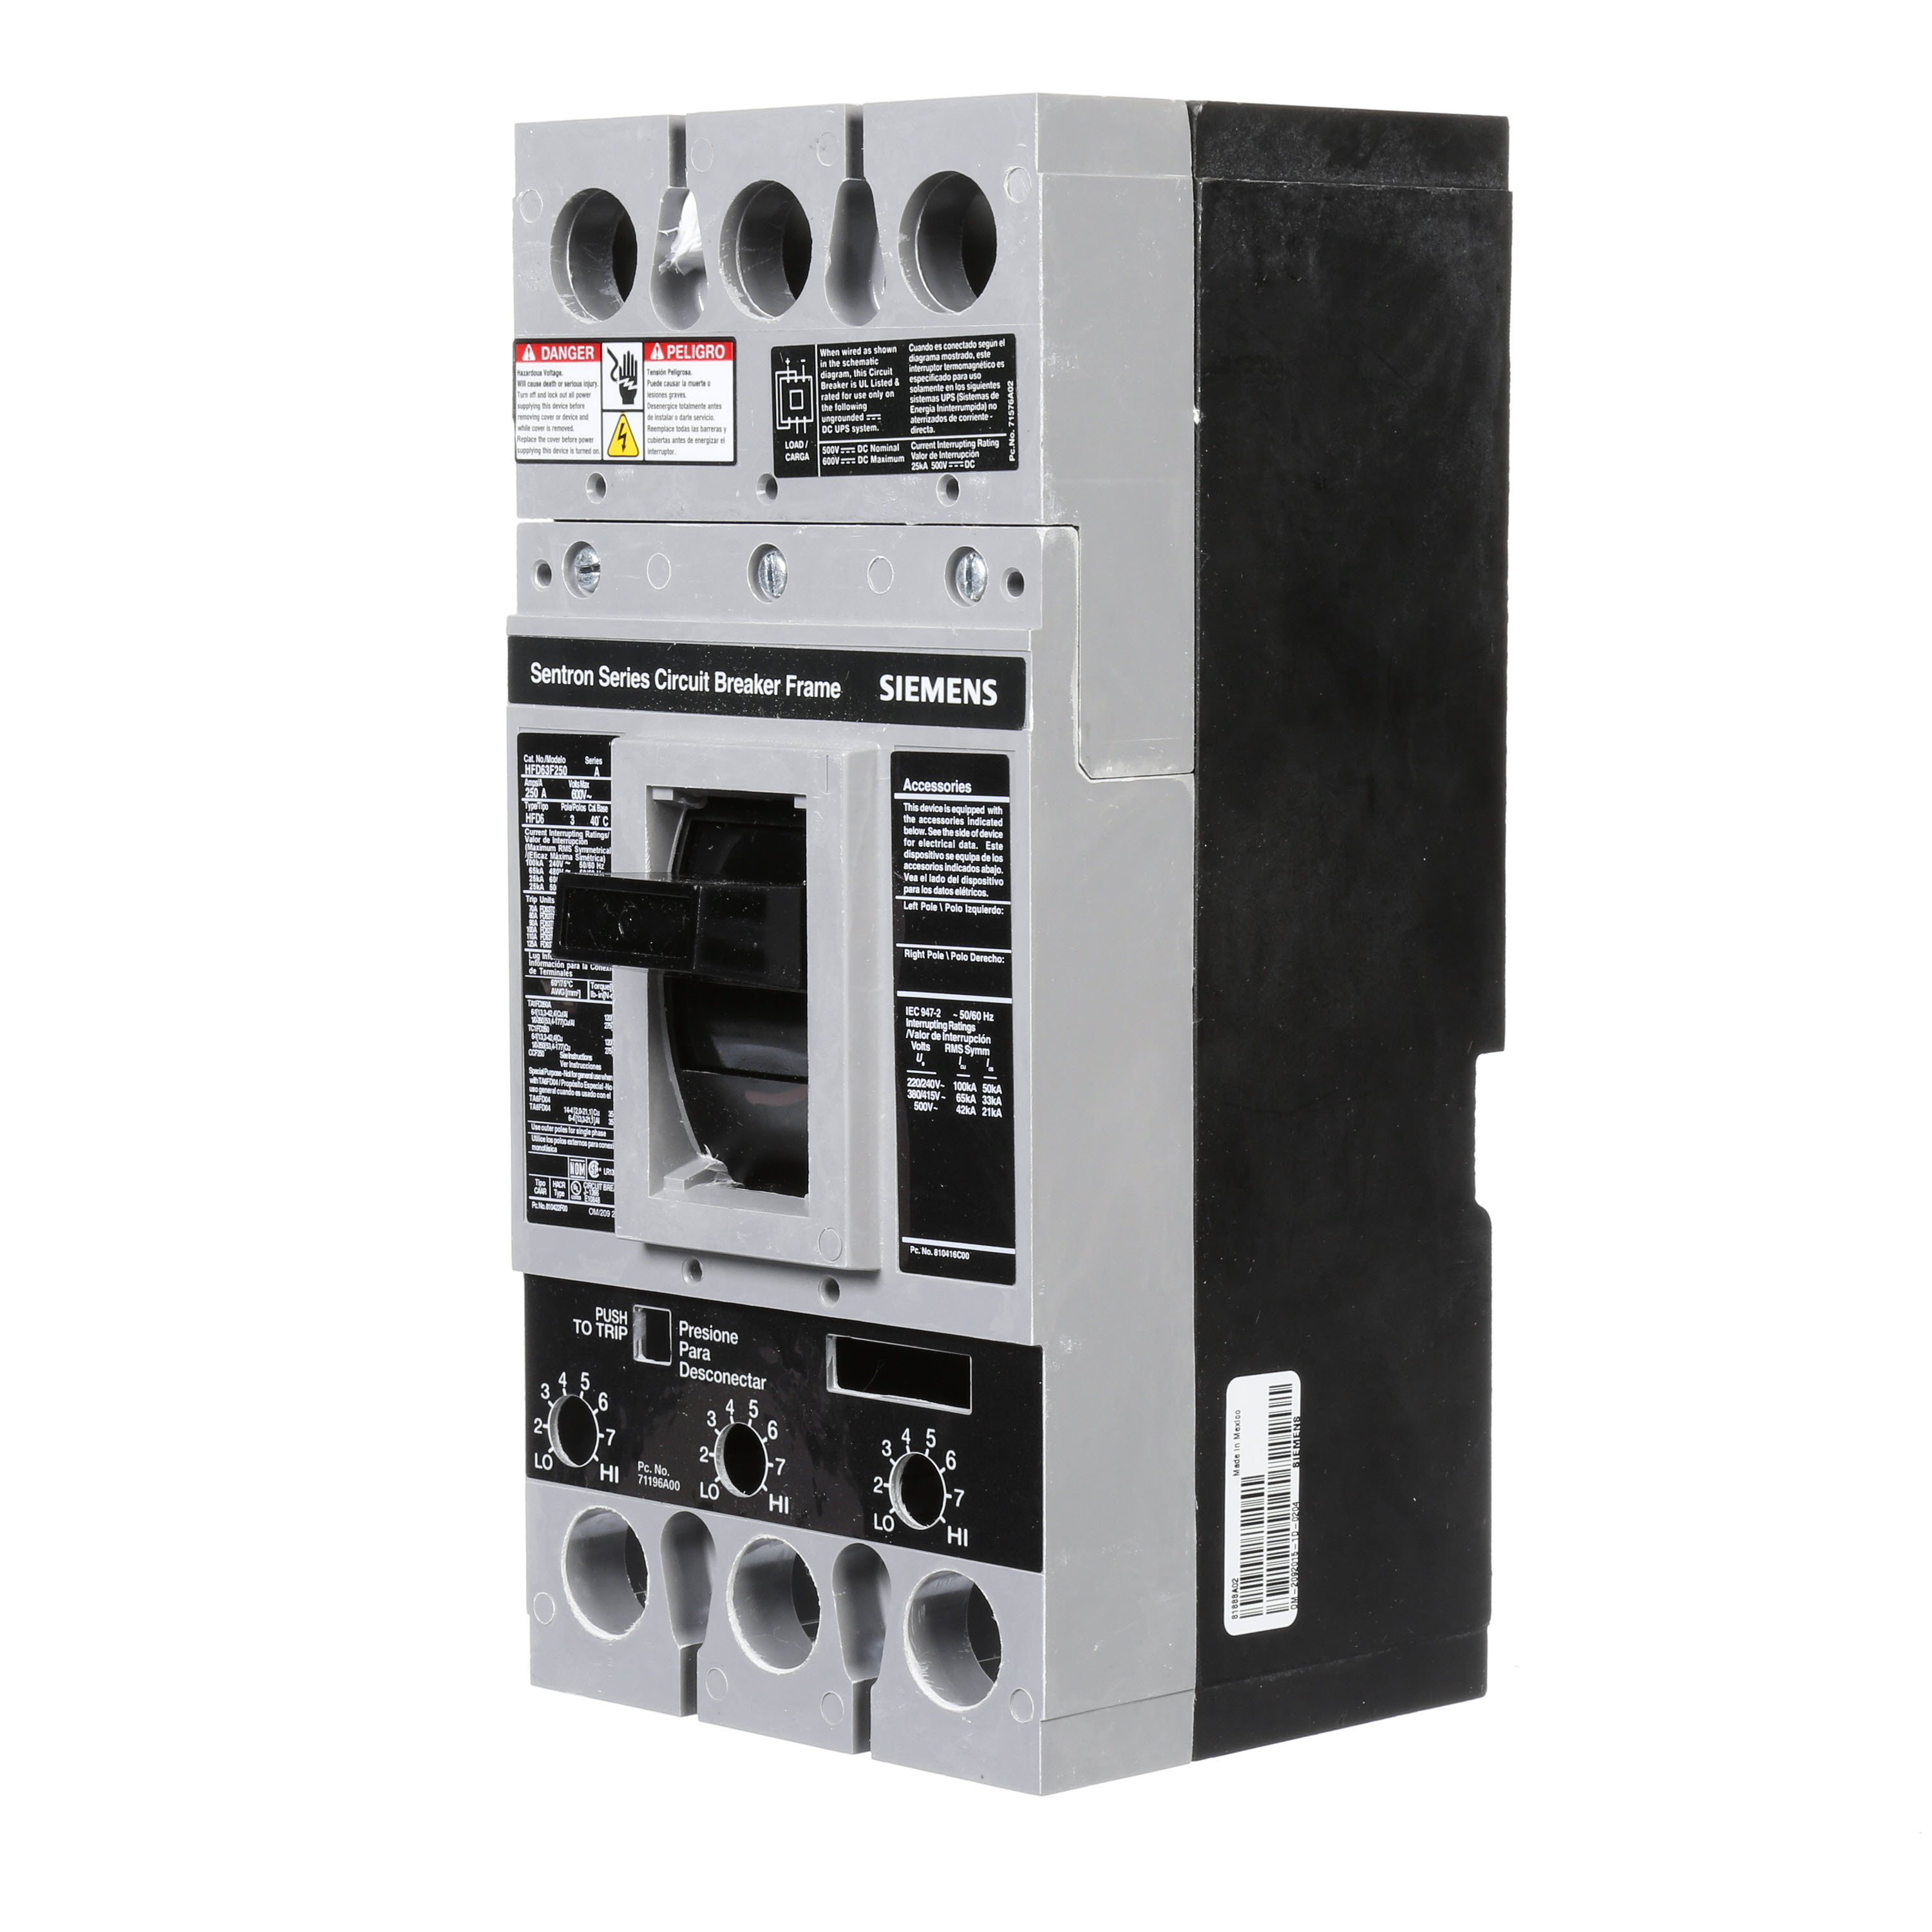 SIEMENS LOW VOLTAGE SENTRON MOLDED CASE CIRCUIT BREAKER. 250A FD FRAME FOR HIGHBREAKING CAPACITY 3-POLE 600V BREAKERS.